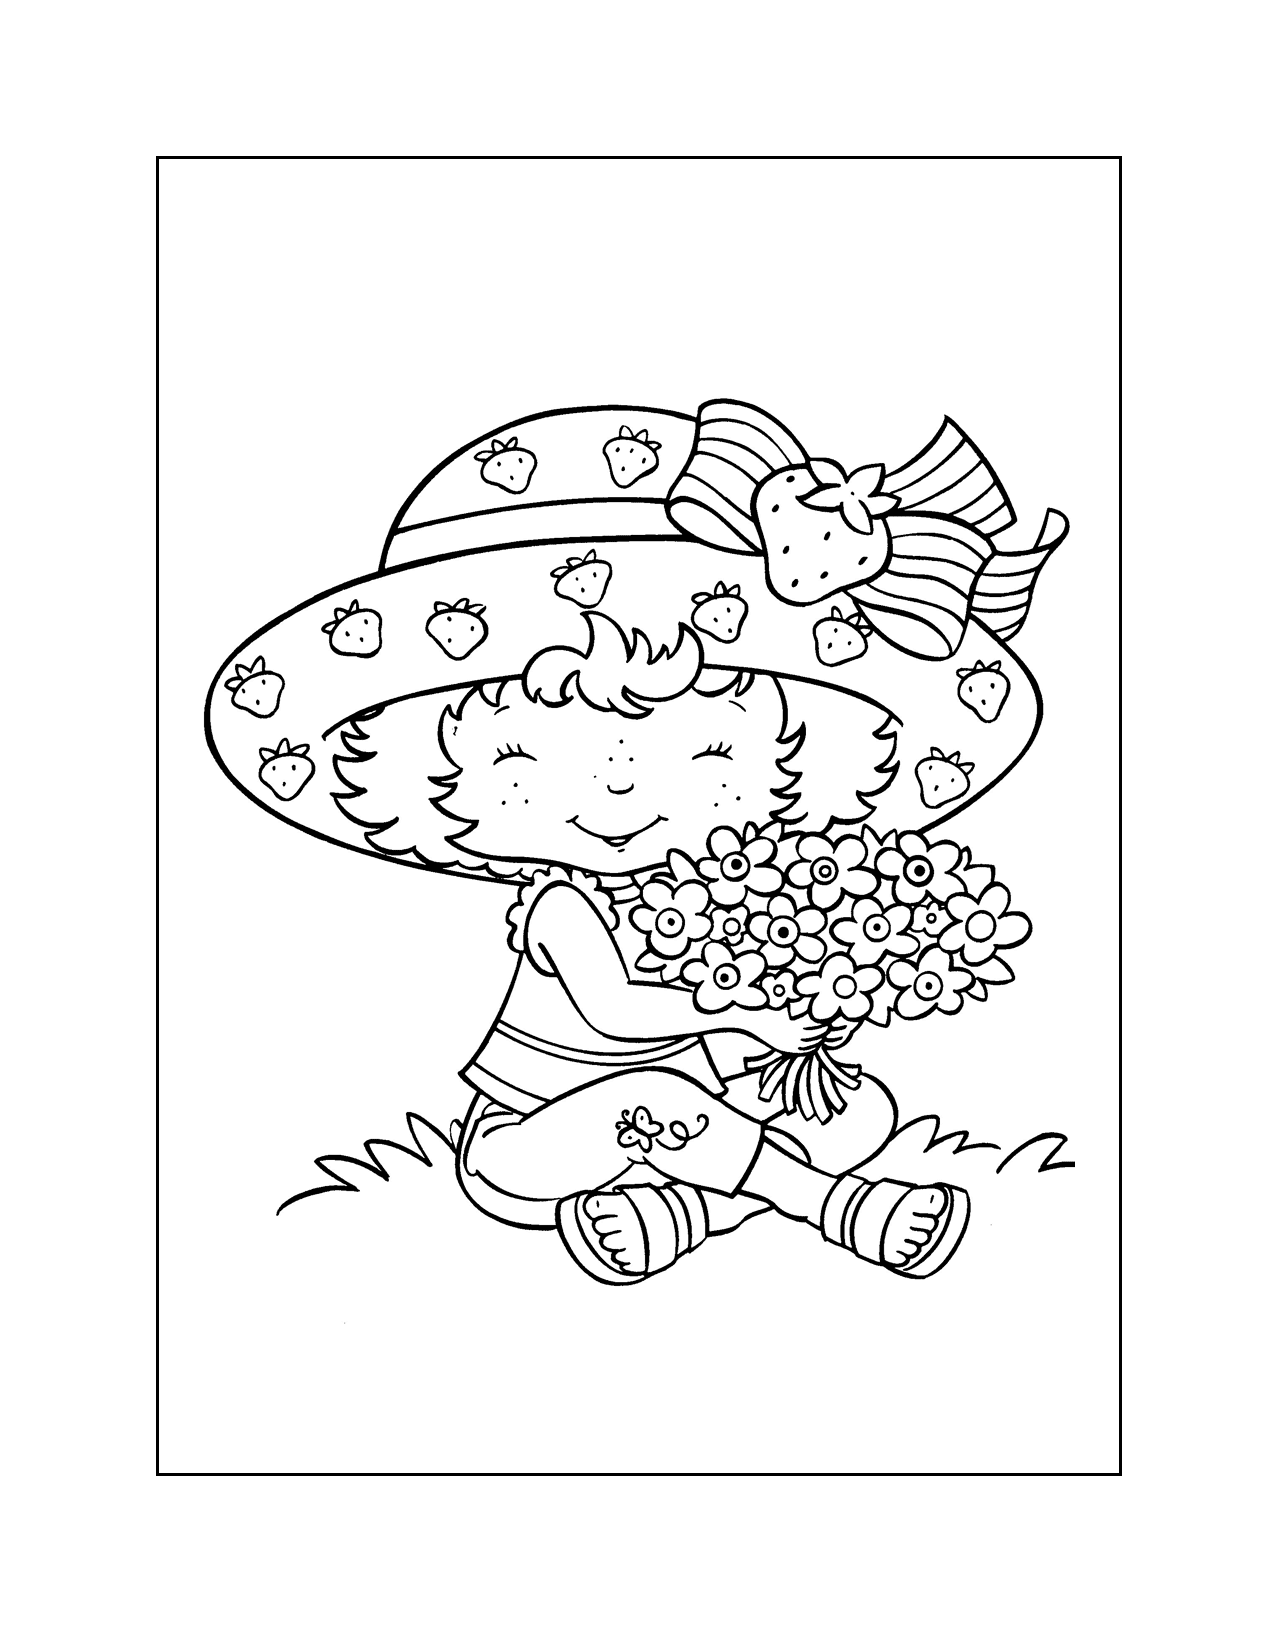 Strawberry Shortcake Loves Flowers Coloring Page